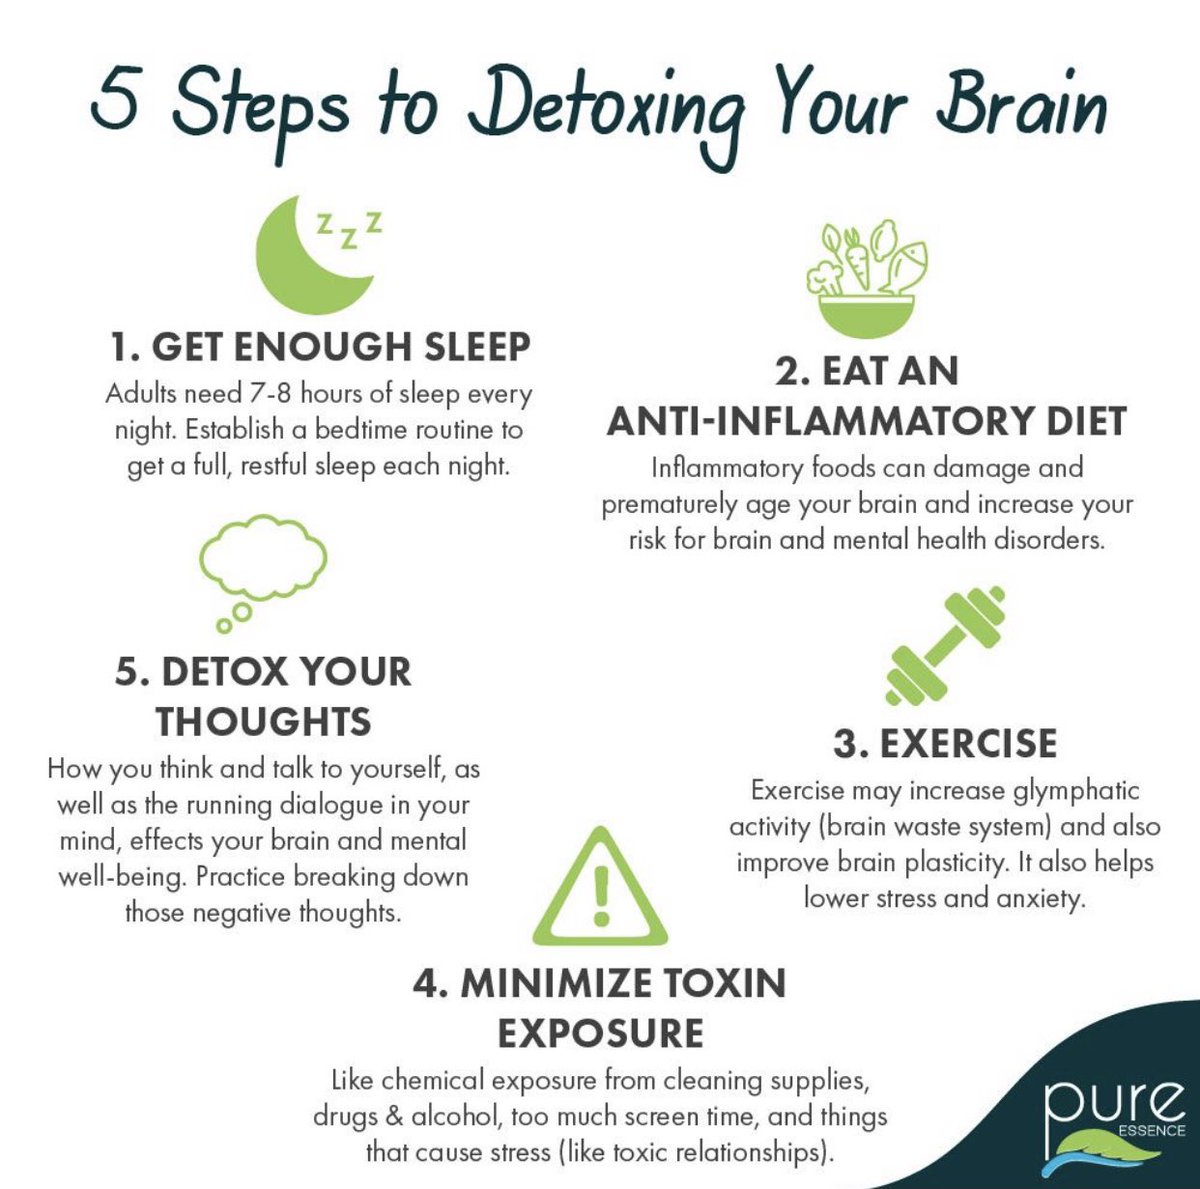 Did you know that your brain has a detoxification process? 🤔 During your sleep cycle, the #GlymphaticSystem works on removing waste & toxins from the brain. The build-up of such toxins can harm your #BrainHealth & cognitive function.

Use these tips to help detox your brain 🧠